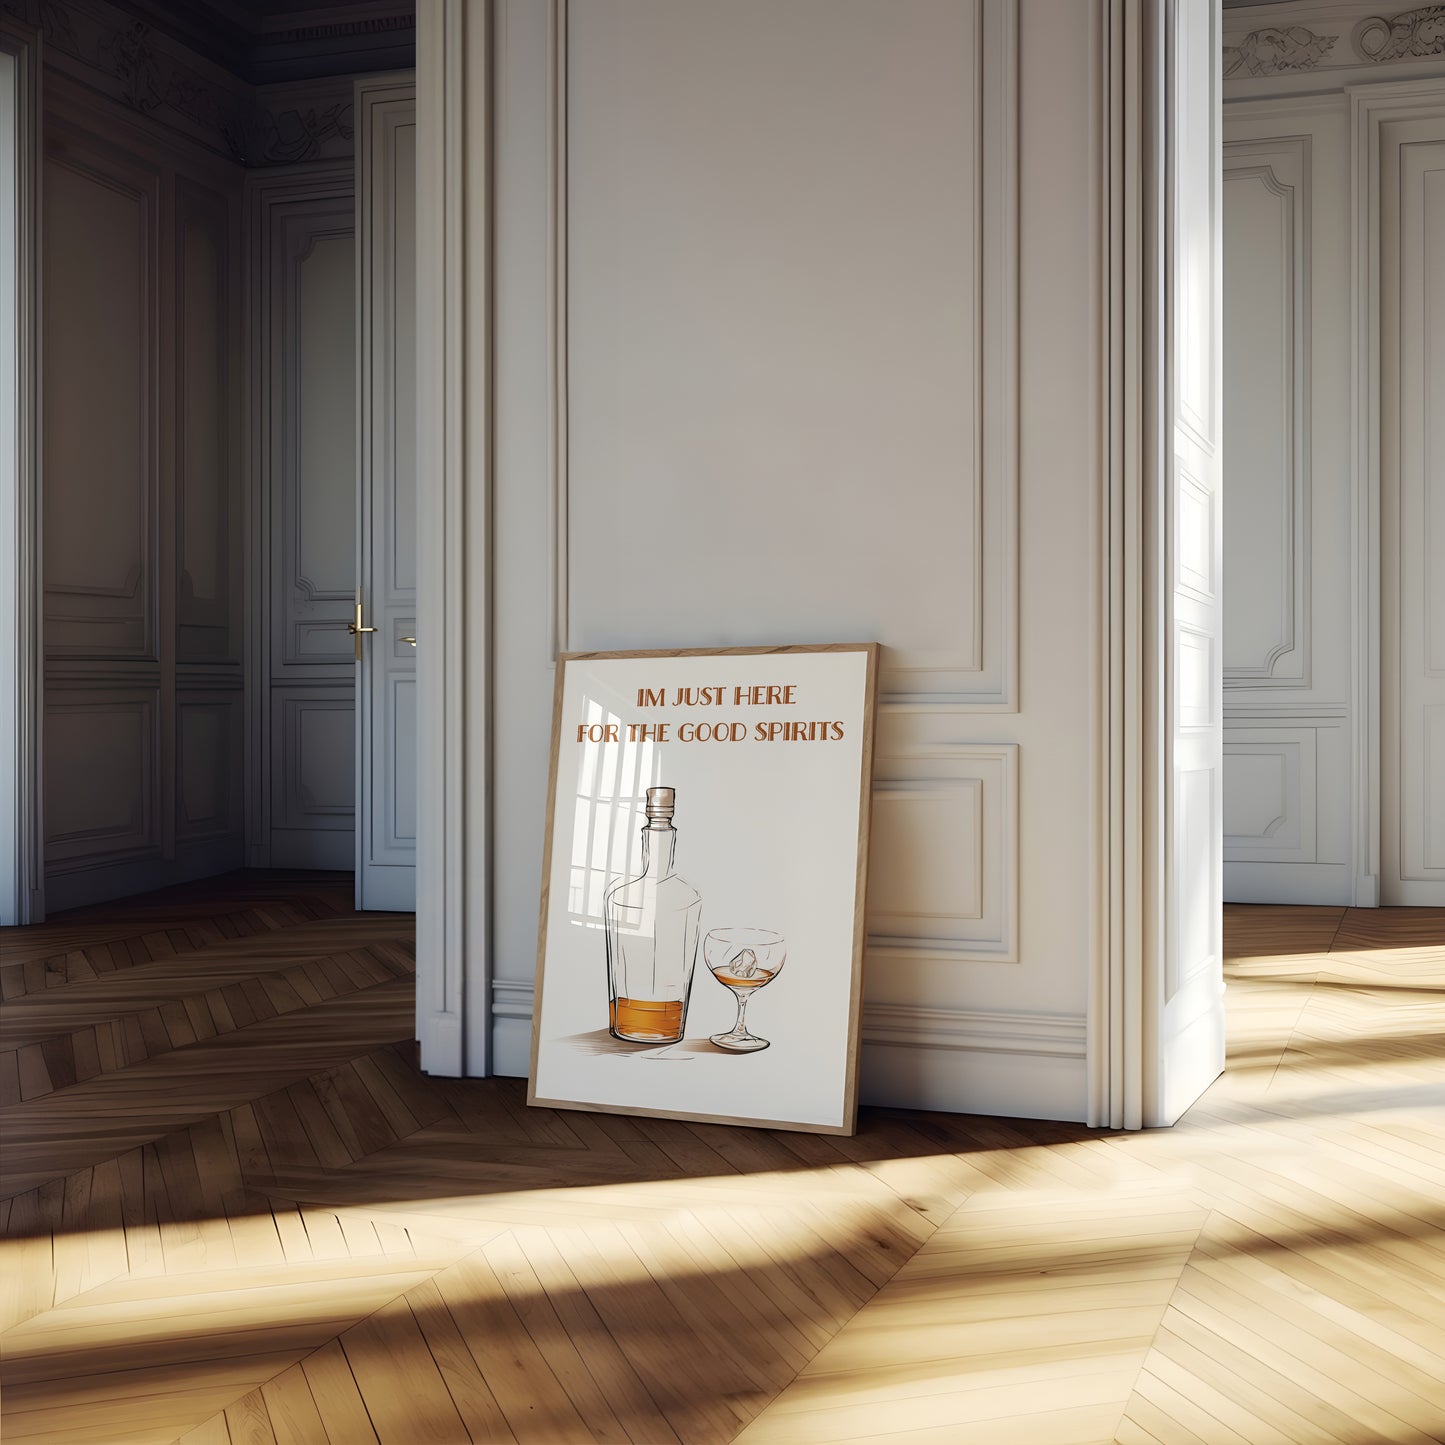 An illustrated poster in an elegant room saying "I'm just here for the good spirits" with an image of a bottle and a glass.